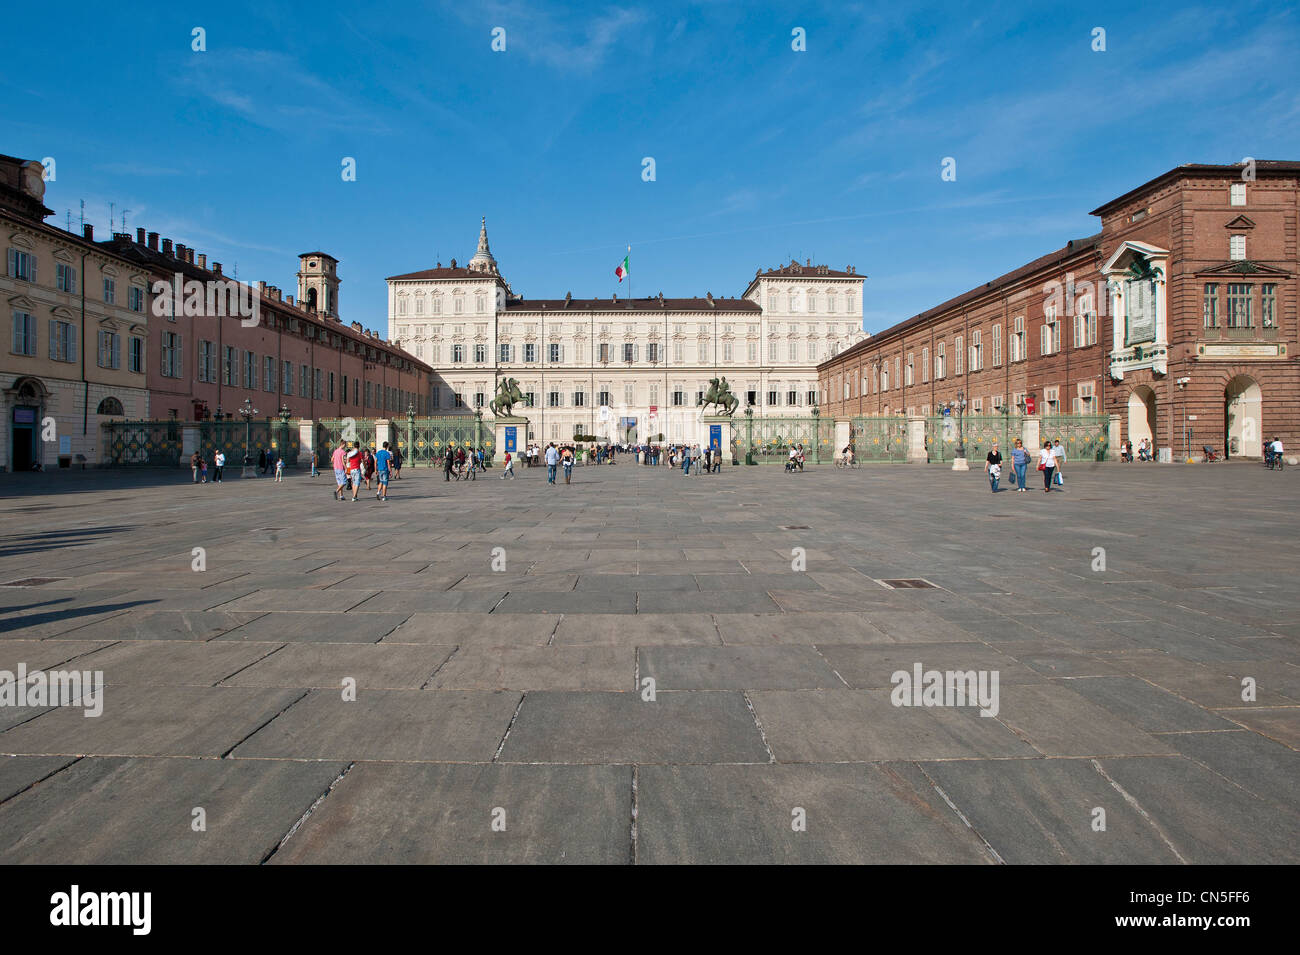 Europe Italy Piedmont Turin Piazza Castello the Royal palace Stock Photo